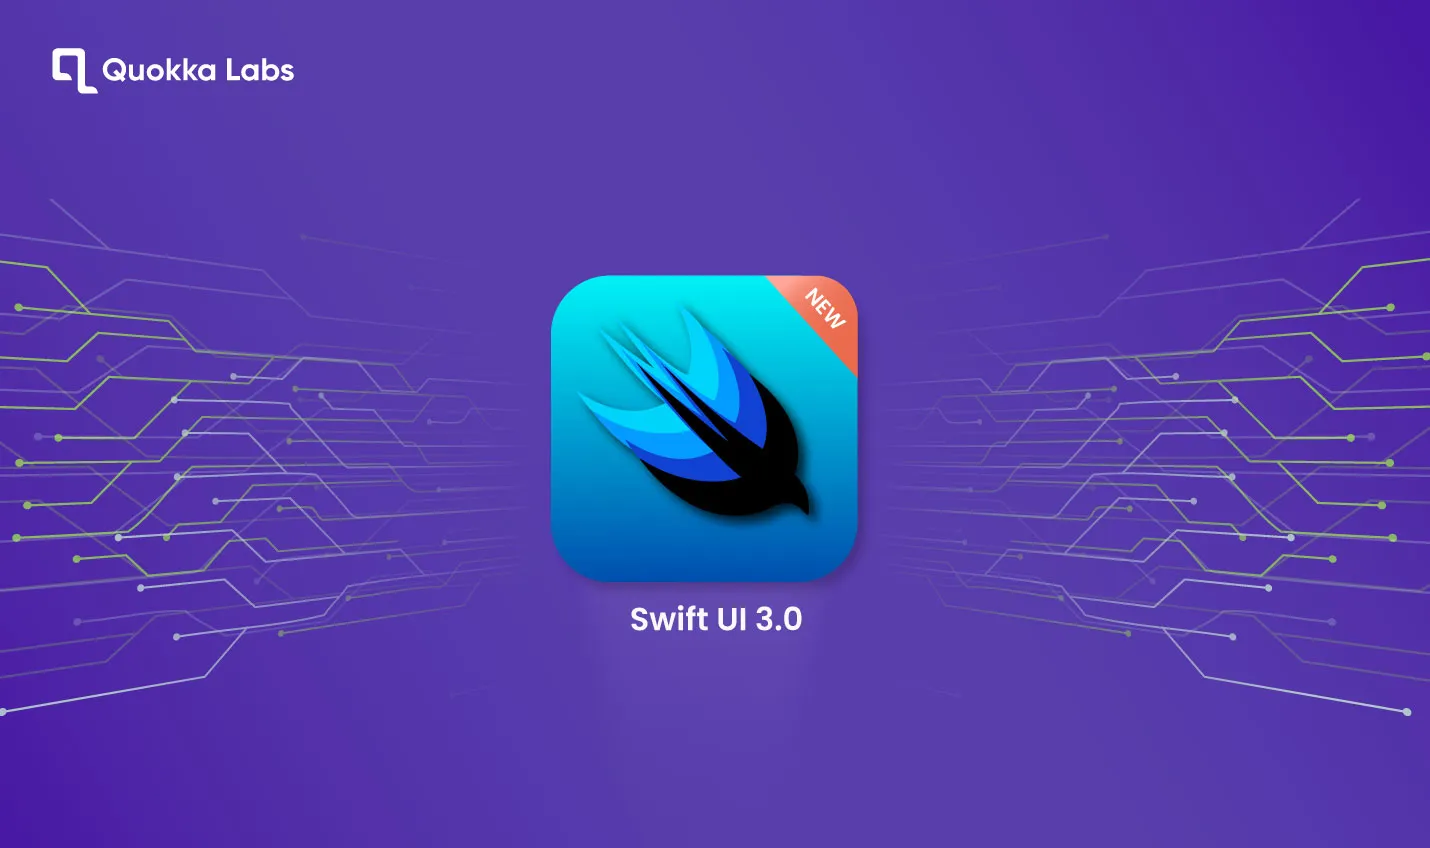 What’s New In SwiftUI 3.0?